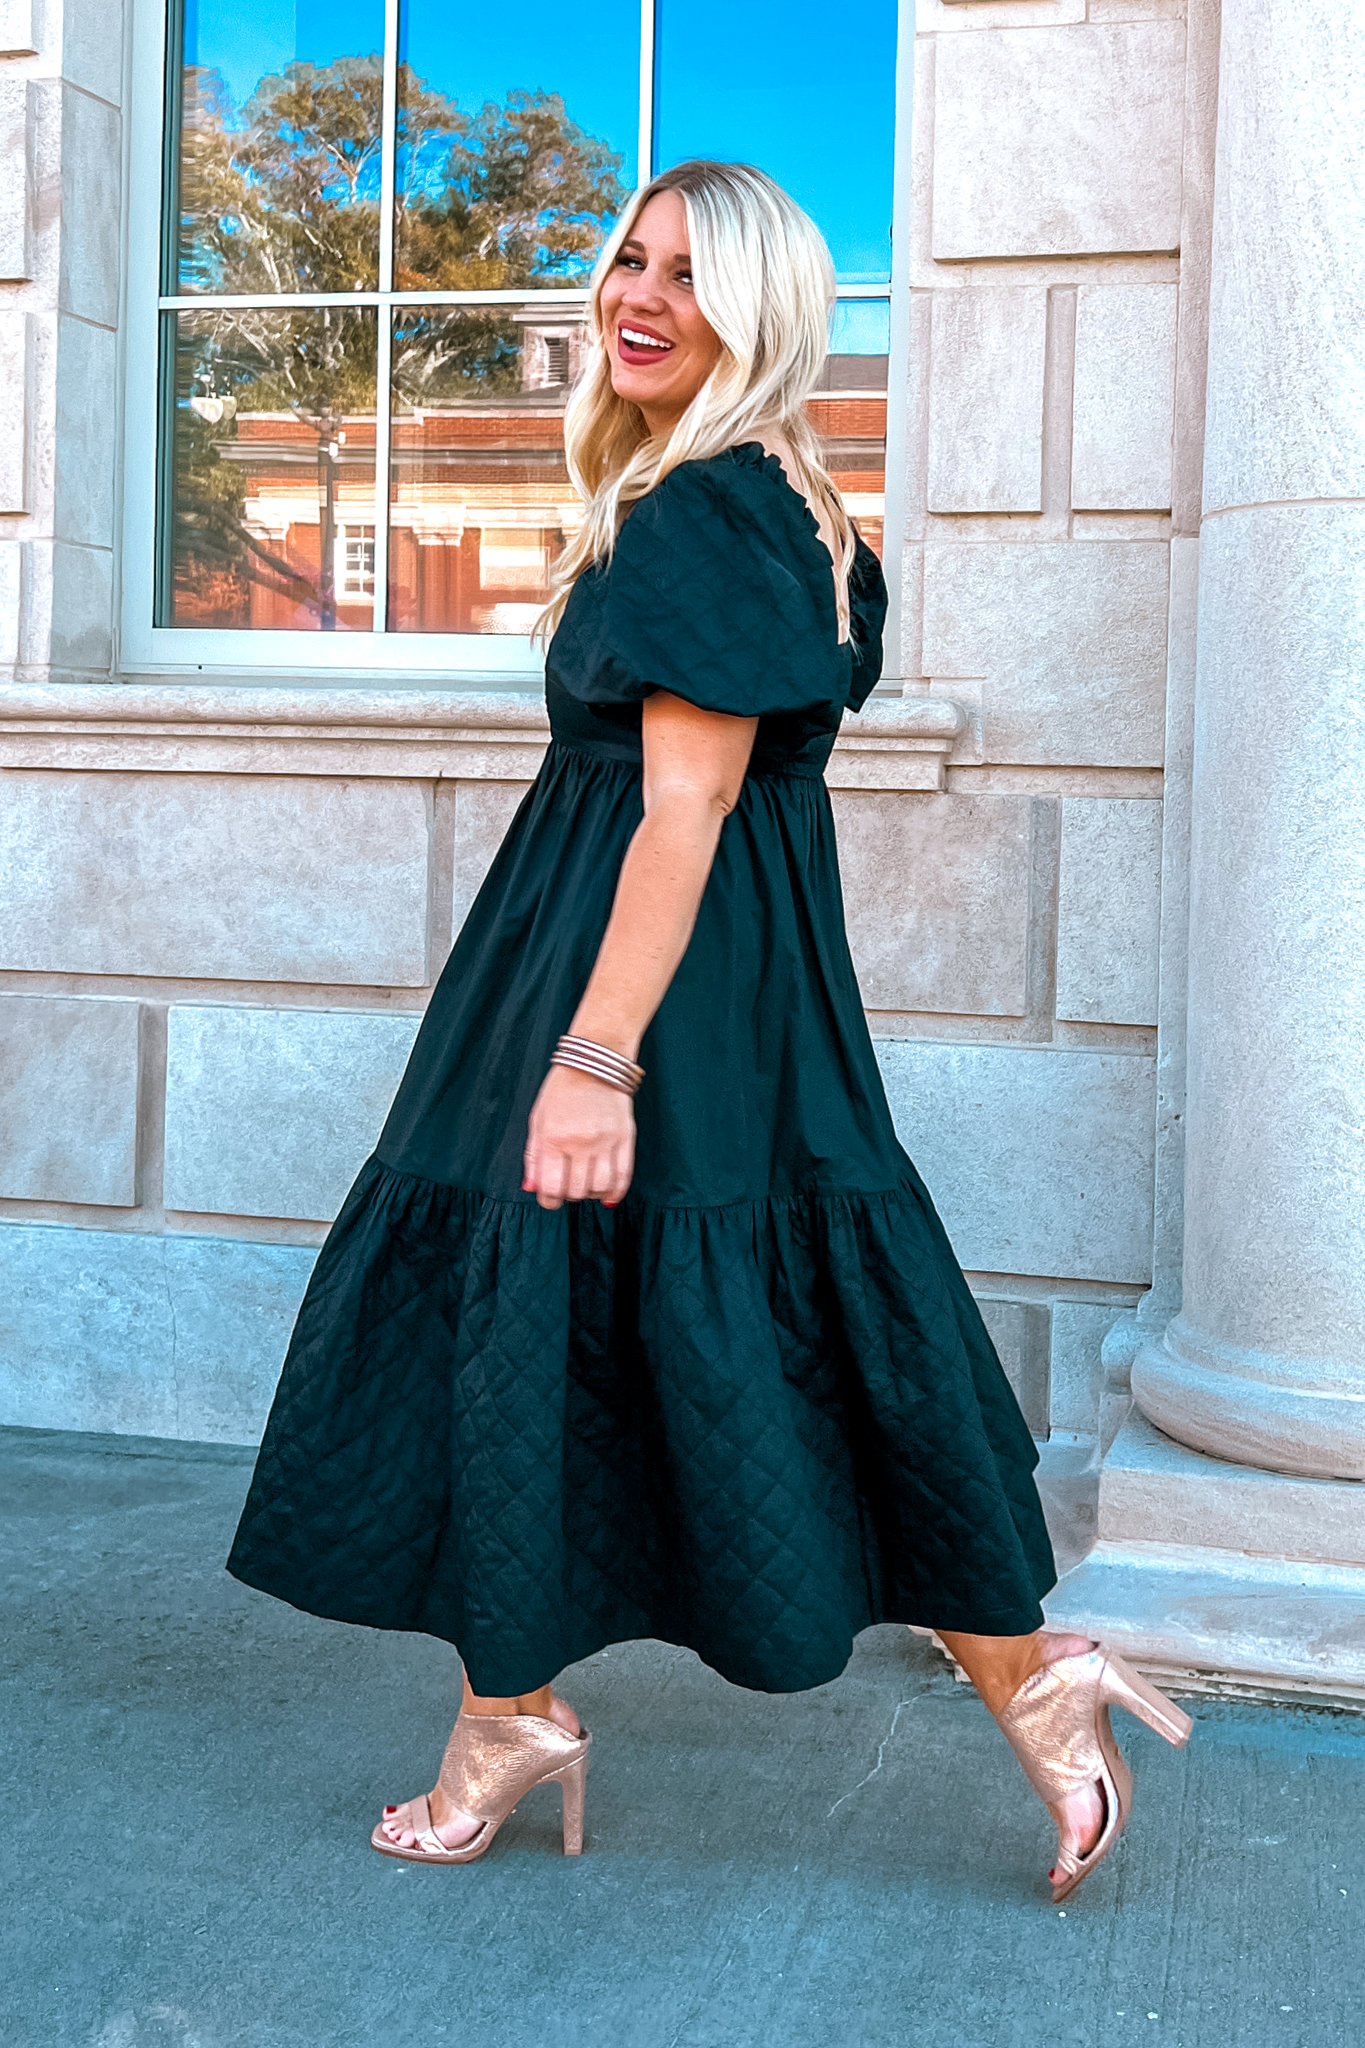 The Marigold Dress in Black by Crosby